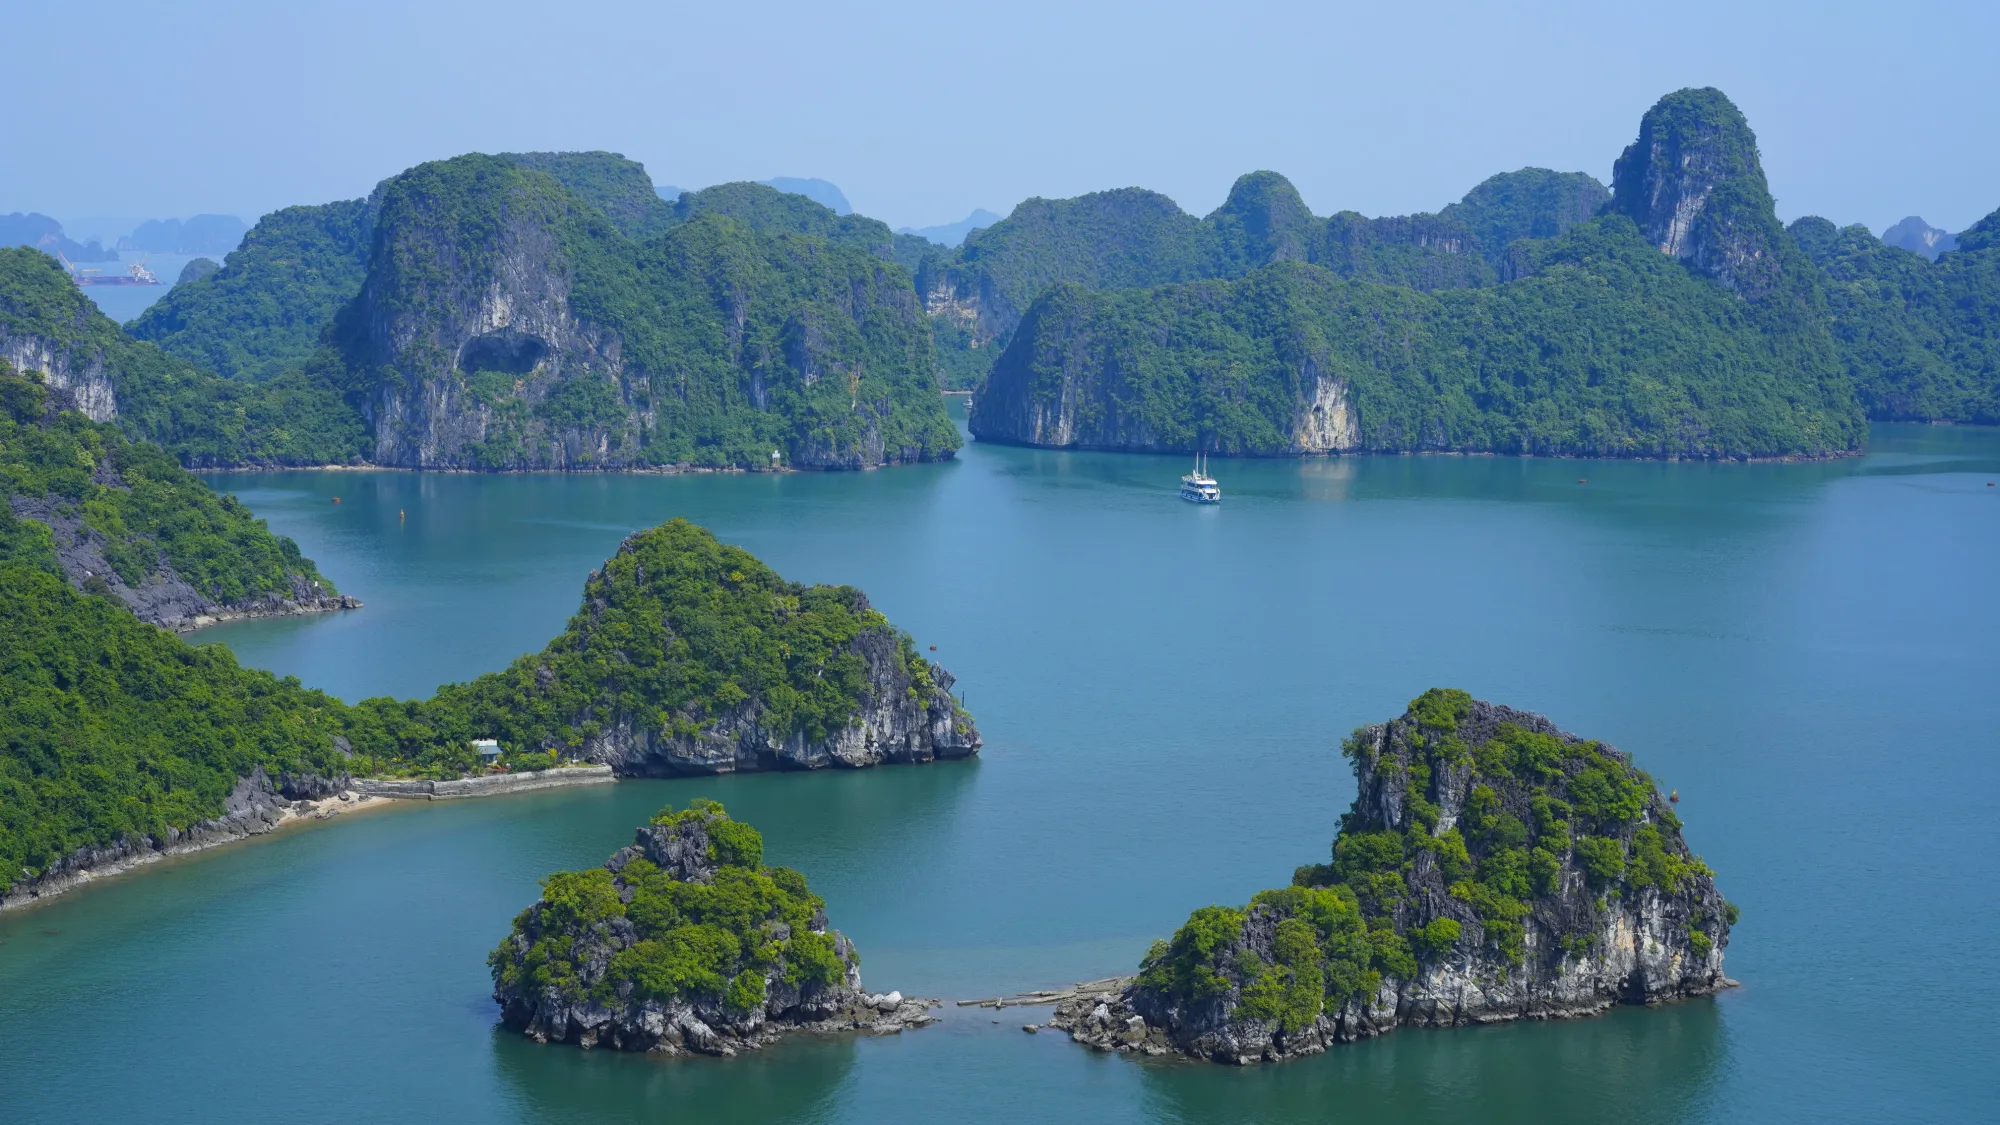 Looking down over several islands in Ha Long Bay